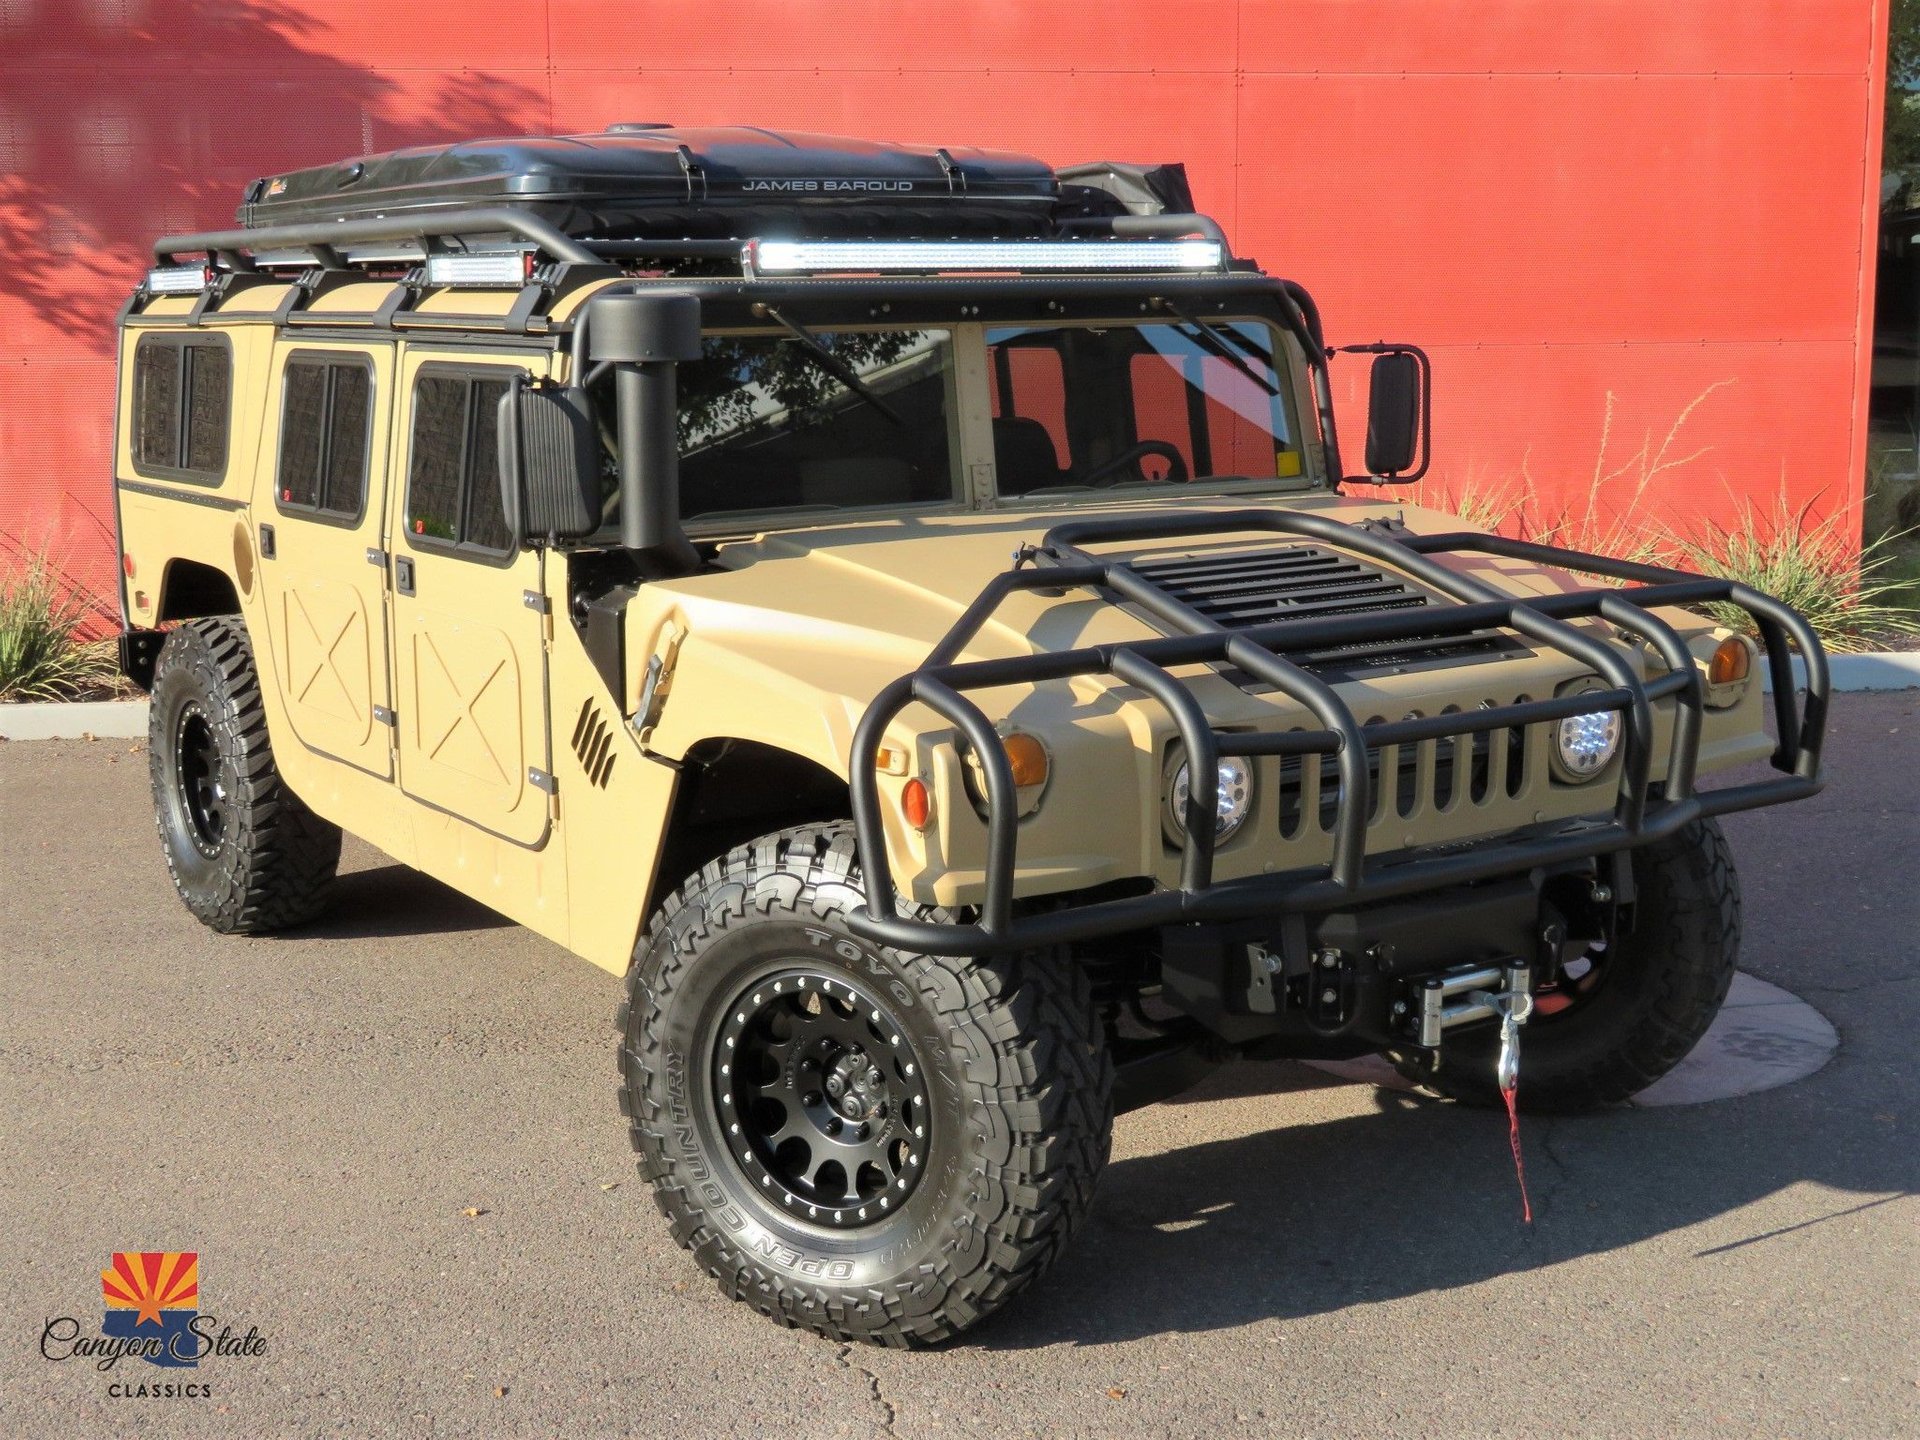 1987 Am General Hummer HMMWV | Canyon State Classics